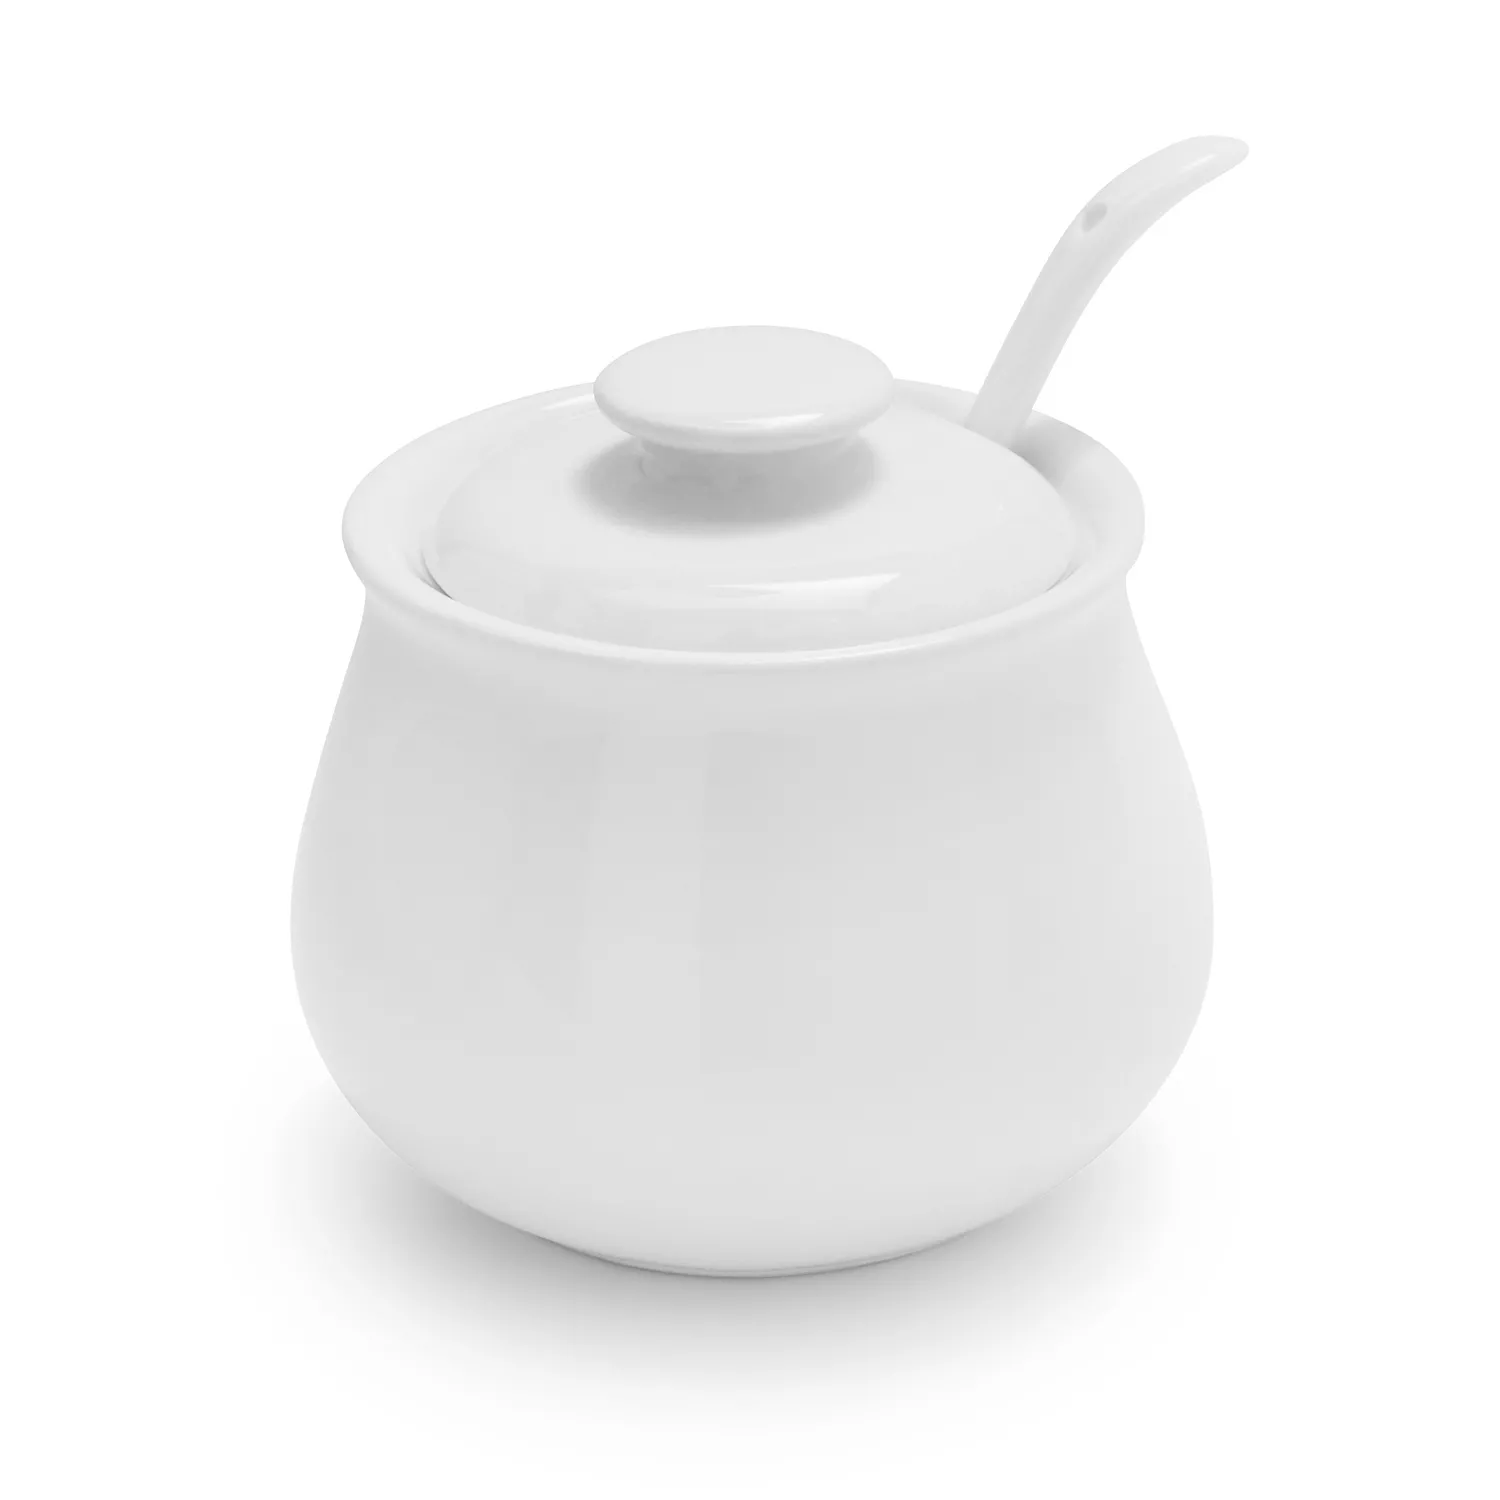 manufactory white ceramic sugar coffee creamer container from